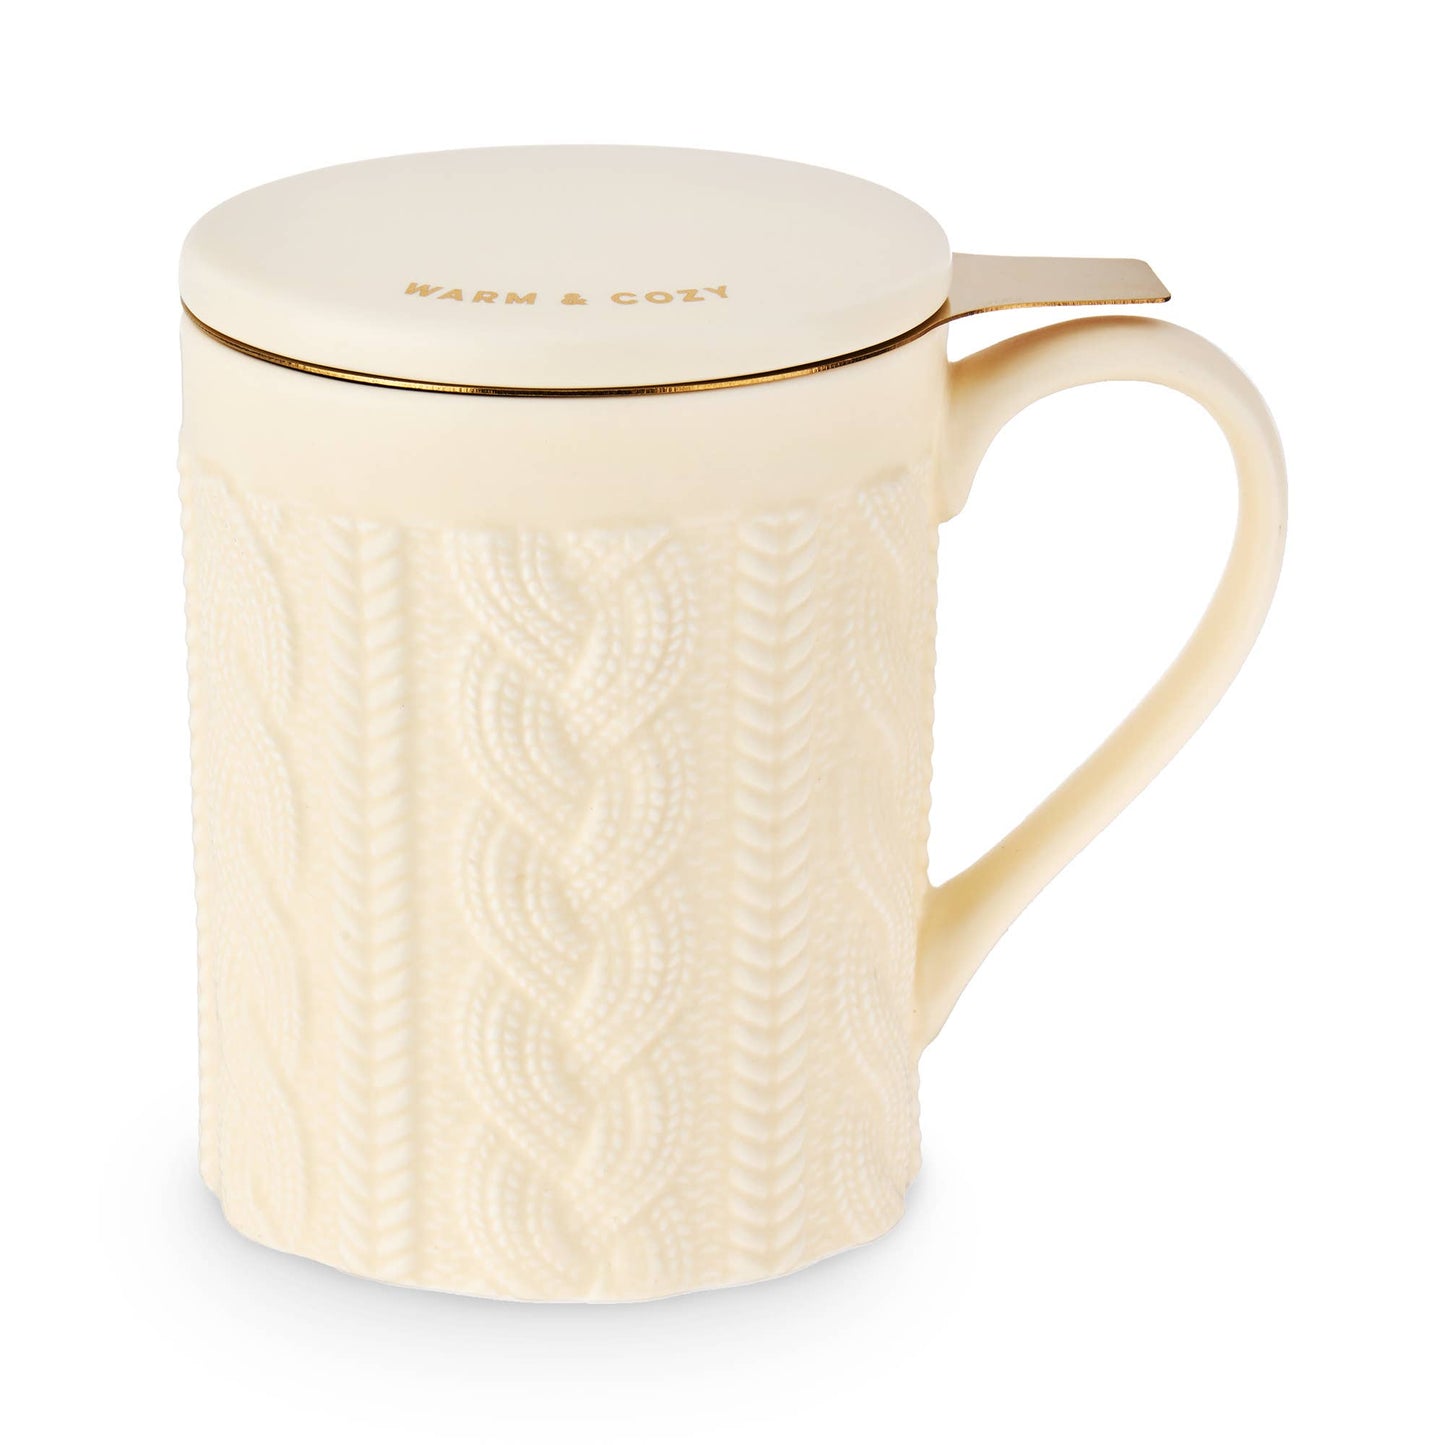 Pinky Up - Annette™ Knit Ceramic Tea Mug & Infuser by Pinky Up®